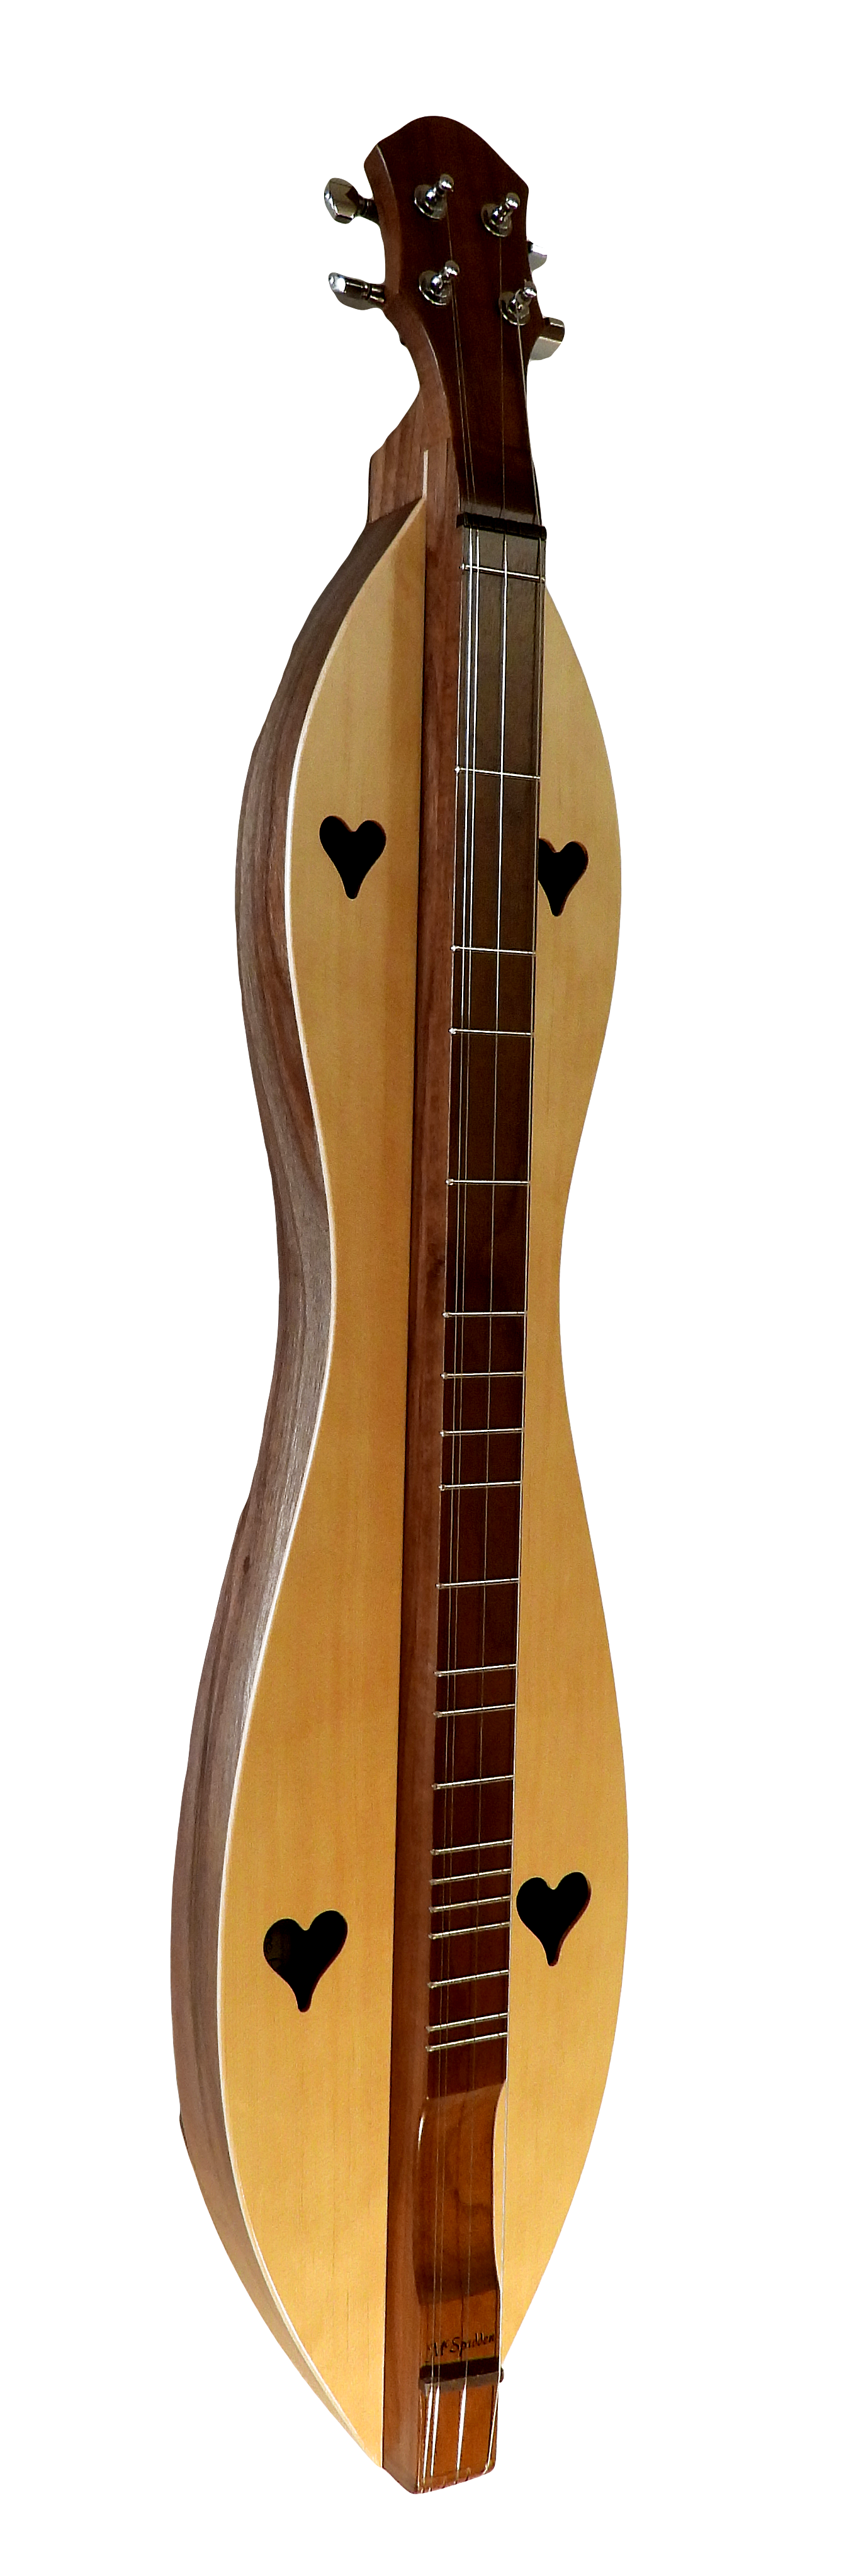 A 4 String, Flathead, Hourglass with Walnut back, sides and Spruce top (4FH26WS) acoustic guitar hanging on a wall.